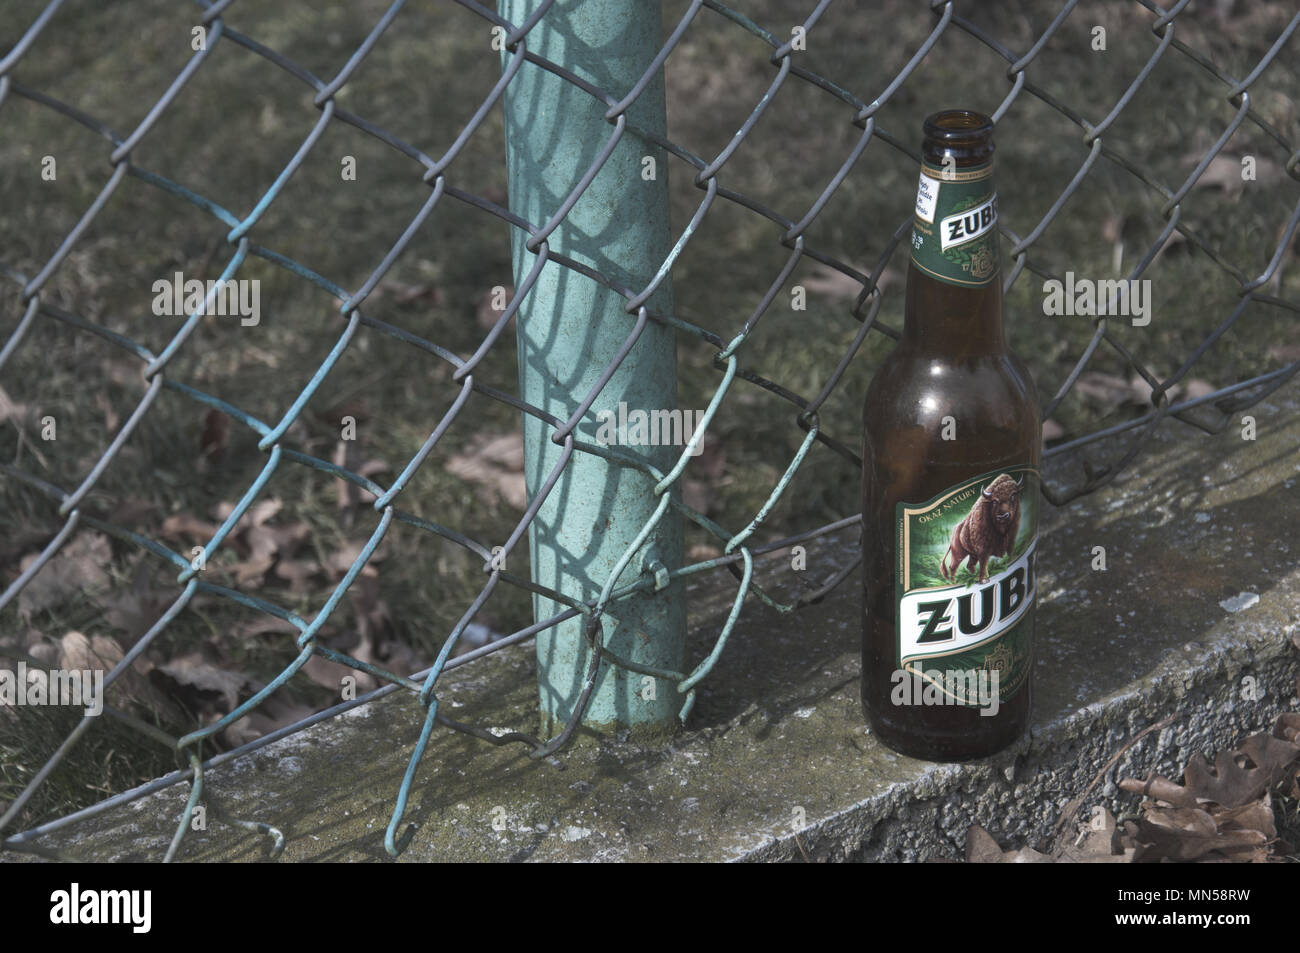 TRZCINIEC DOLNY/POLAND - 04/05/2018: The glass bottle of Zubr (bison) beer, which is one of czech breweries. It shows problem with alcoholism in Polan Stock Photo